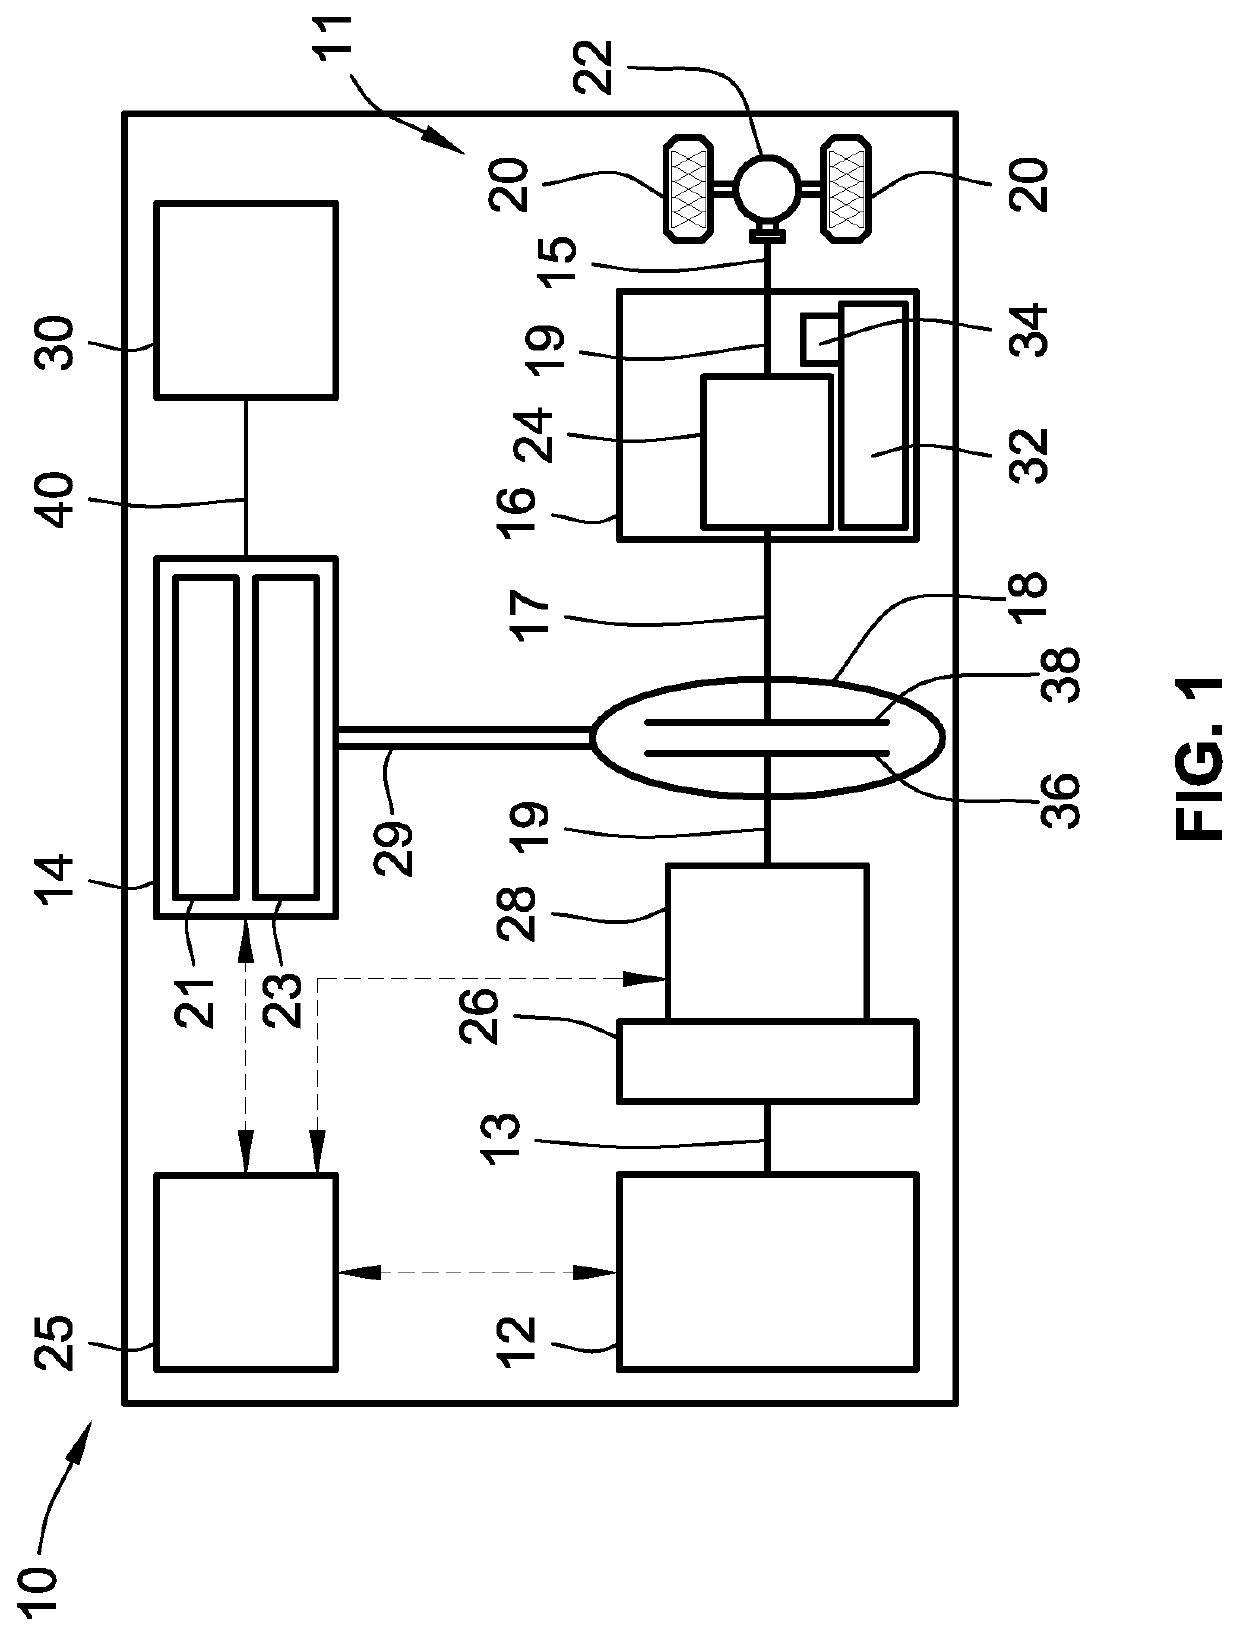 Vascular cooling system for electrical conductors